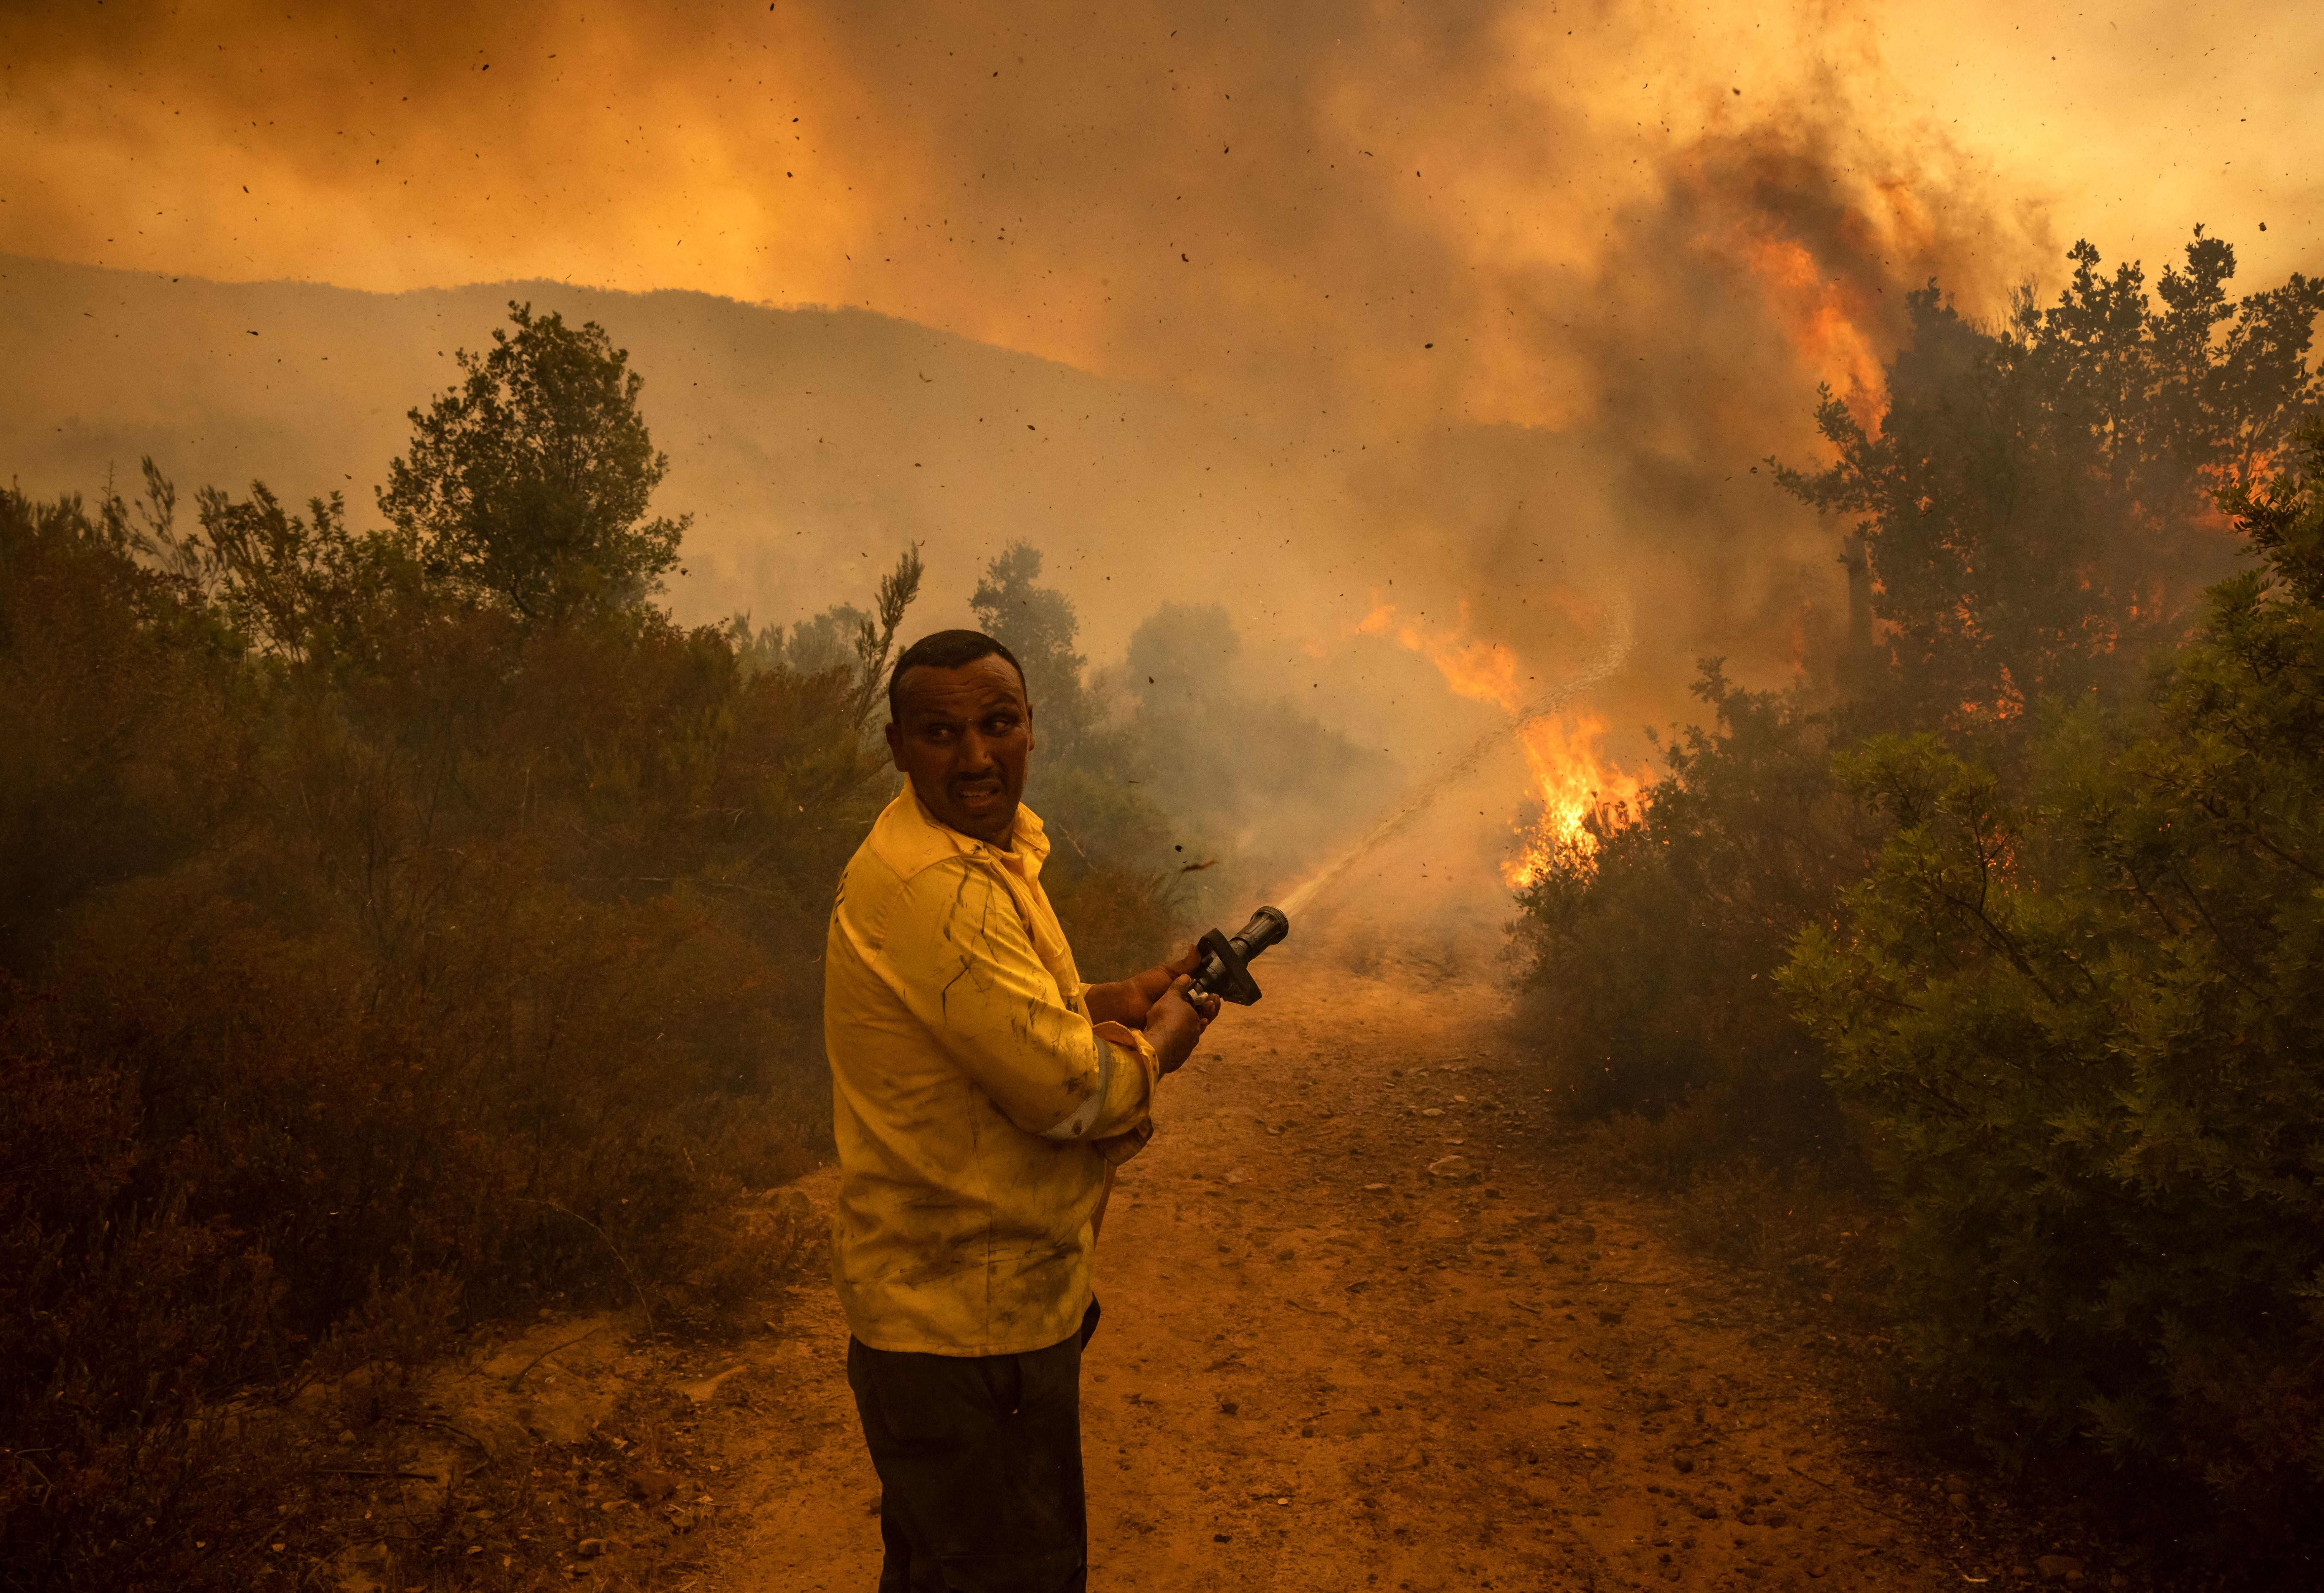 A forest ranger sprays water from a hose on a forest fire near the Larache region of Ksar el-Kebir, Morocco, on July 15.